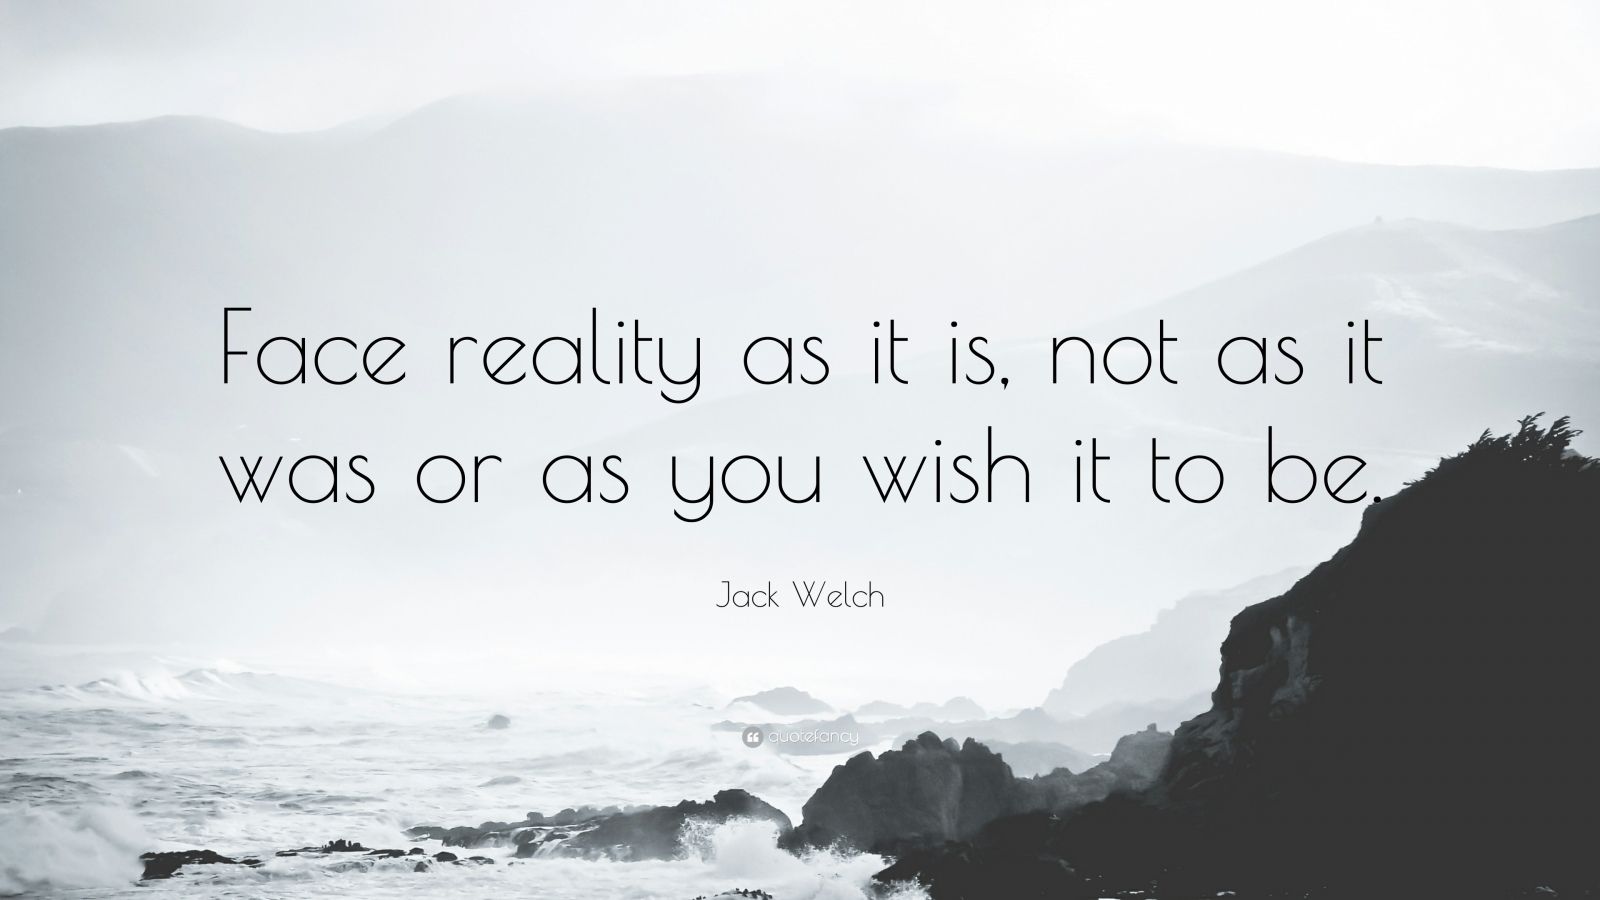 Jack Welch Quote “Face reality as it is, not as it was or